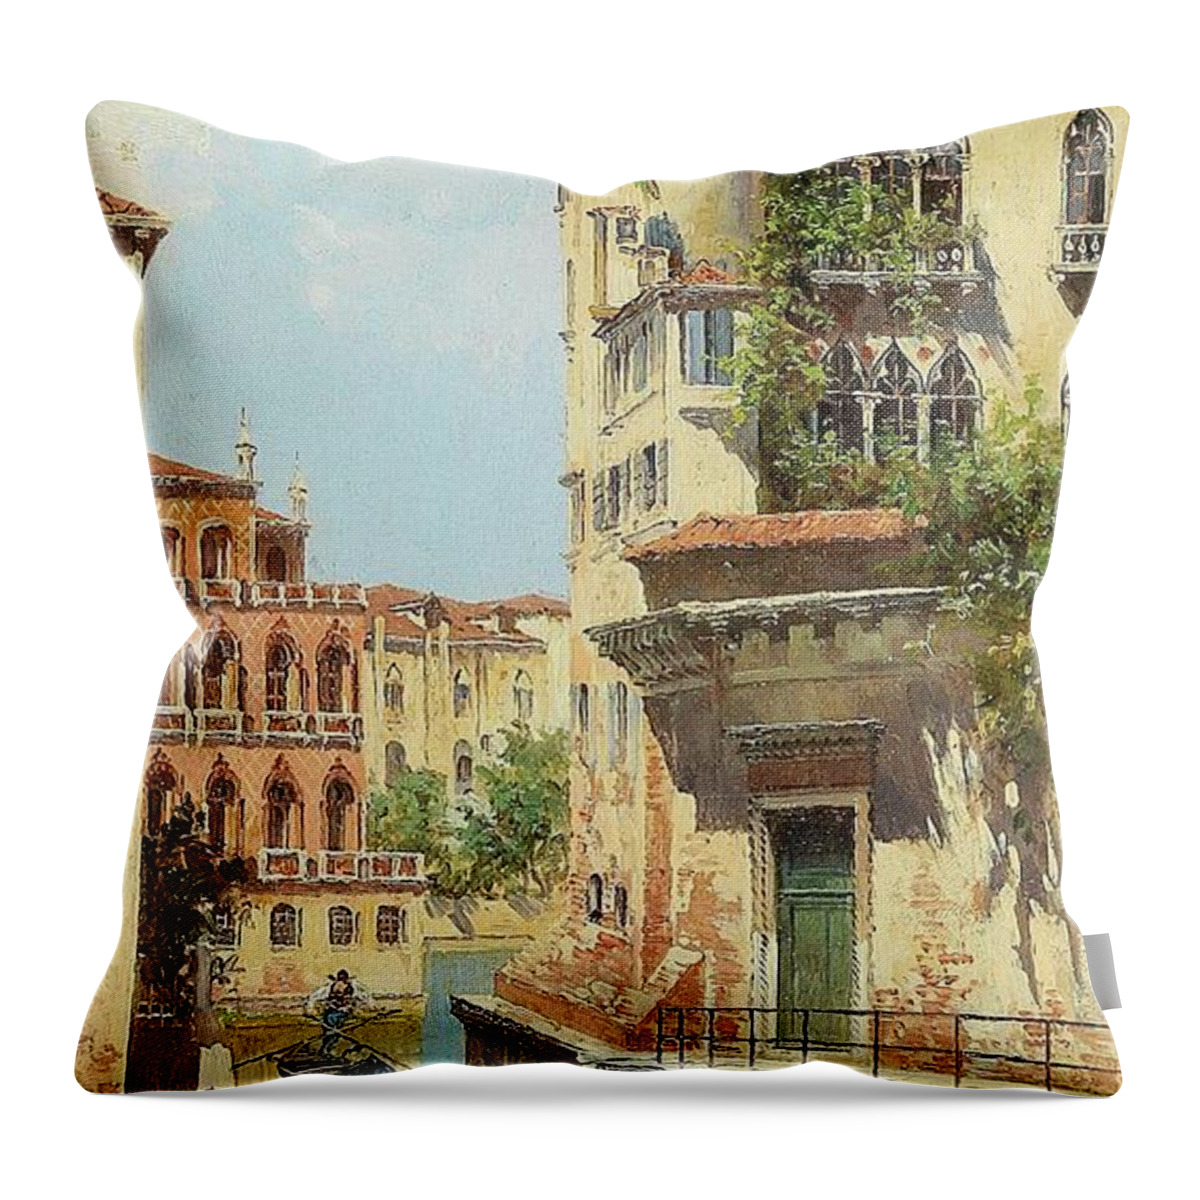 Venice Throw Pillow featuring the painting Canal In Venice With View Of The Back Of The Palazzo Rocca by Antonietta Brandeis